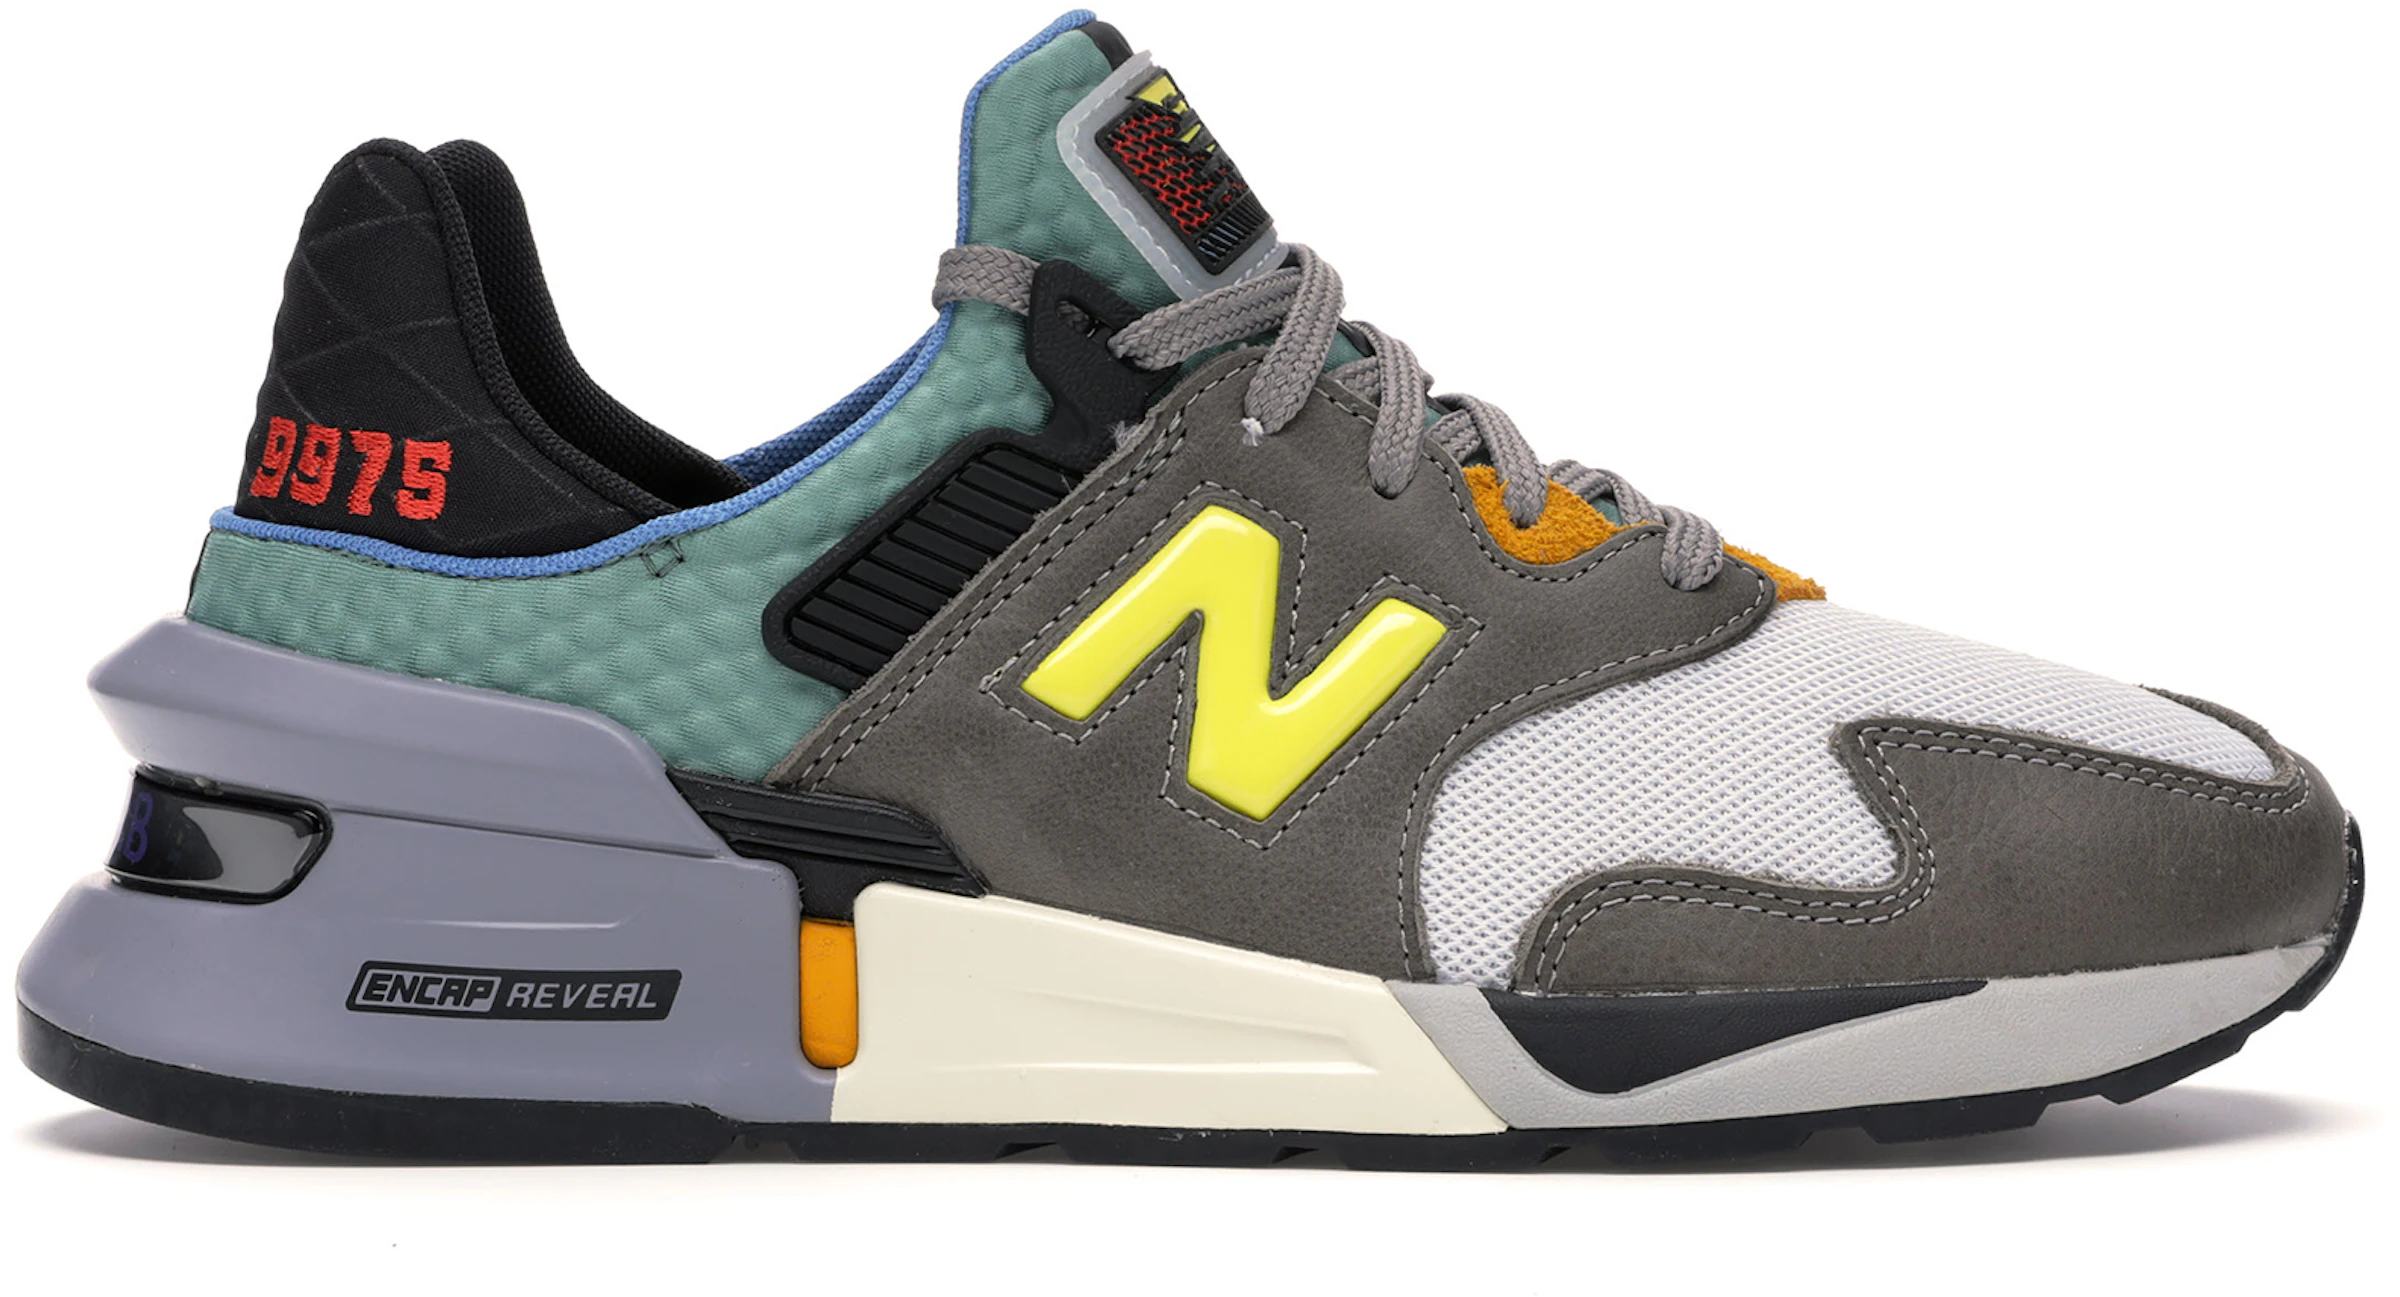 Buy New 997 Shoes & New -